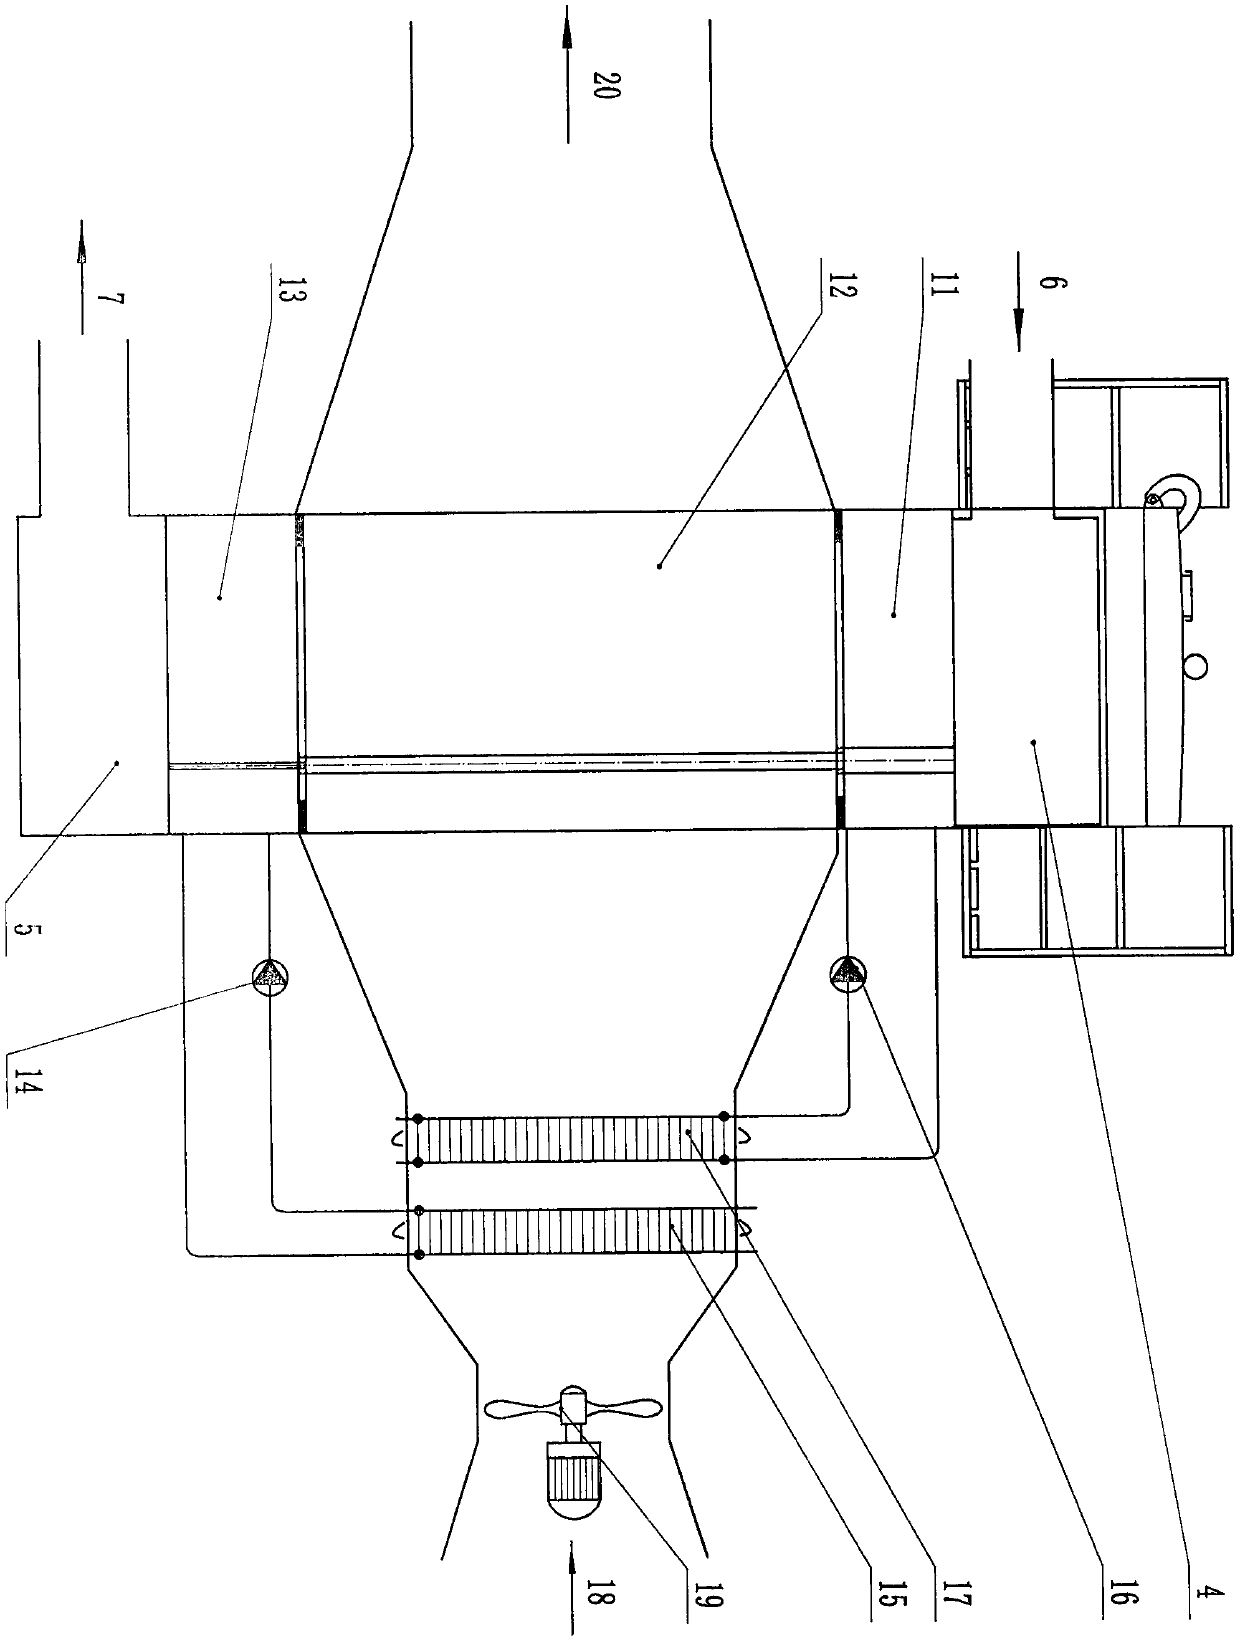 Modular heat exchange method and device particularly suitable for biomass combustion system